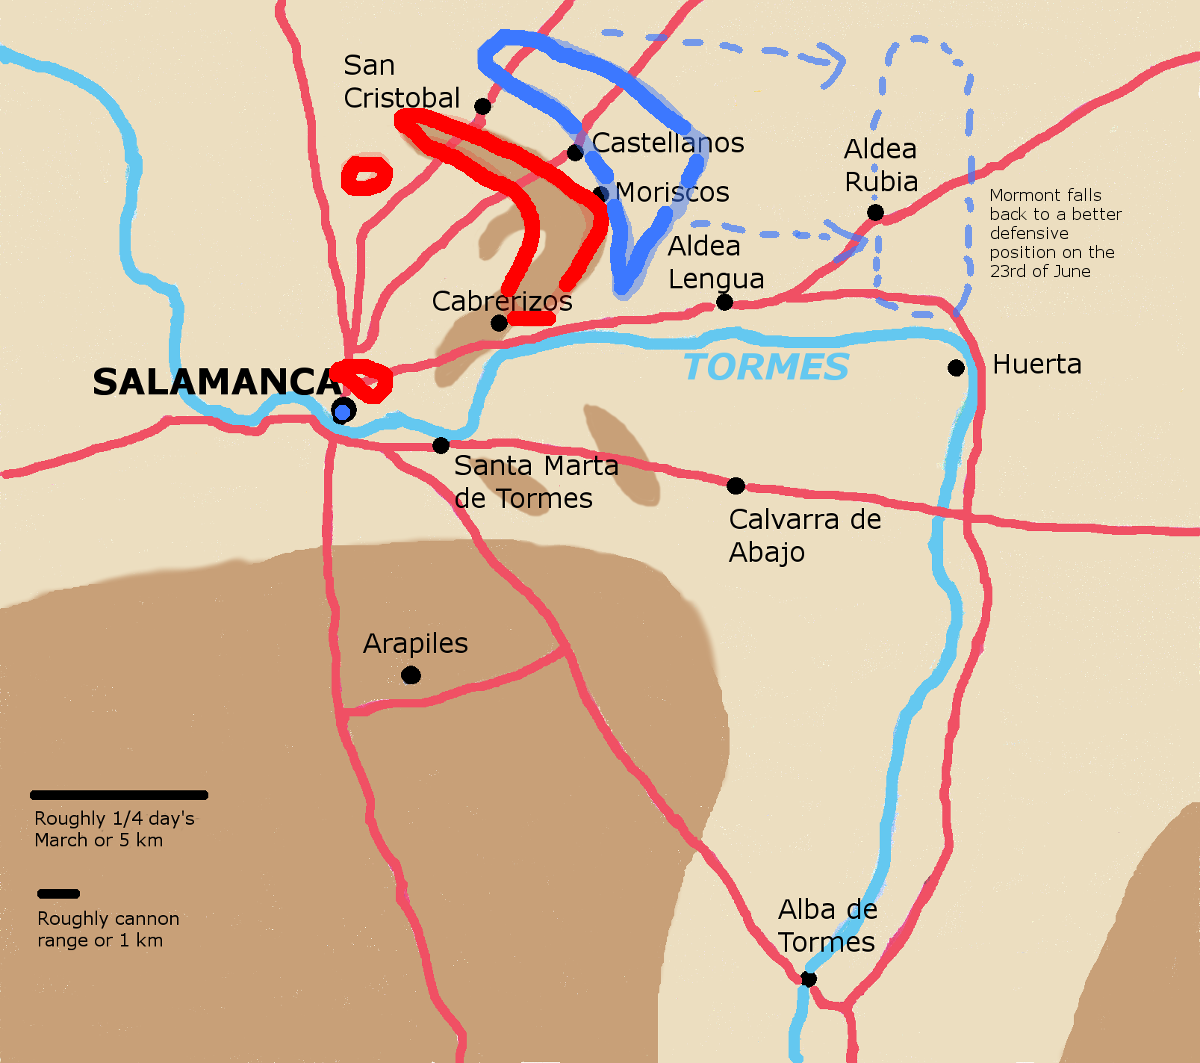 A map showing stand-off on San Cristobal ridge near Salamanca, neither general sees enough advantage to attack.